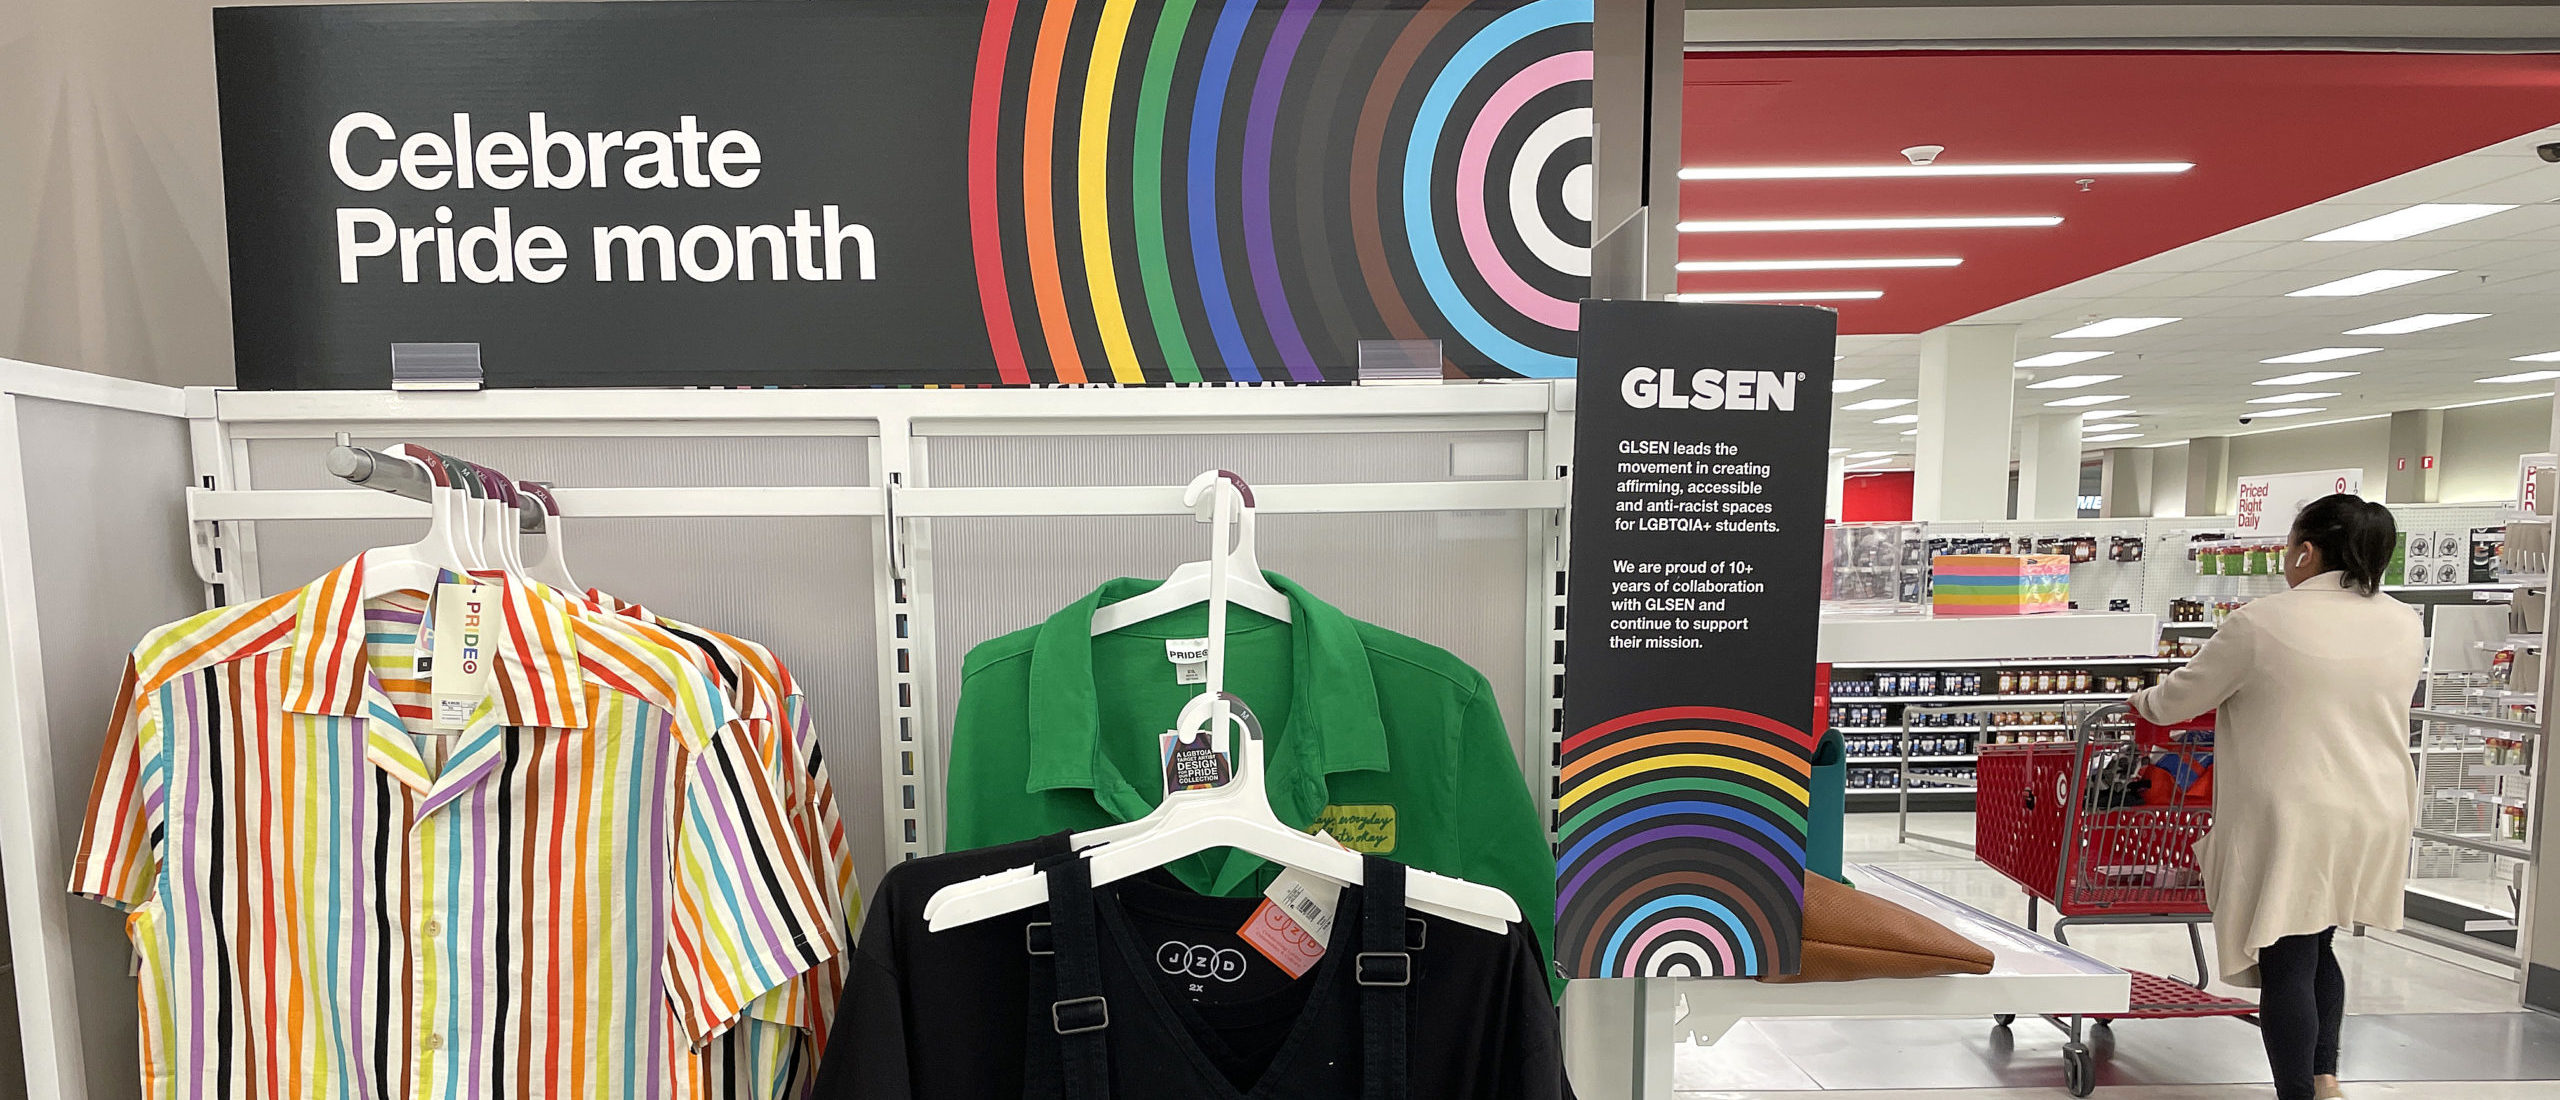 SAN FRANCISCO, CALIFORNIA - MAY 31: Pride Month merchandise is displayed at a Target store on May 31, 2023 in San Francisco, California. Target has pulled some of its Pride Month merchandise from stores or have moved the seasonal displays to lesser seen areas of their stores to avoid conservative backlash that has threatened workers’ safety. (Photo by Justin Sullivan/Getty Images)